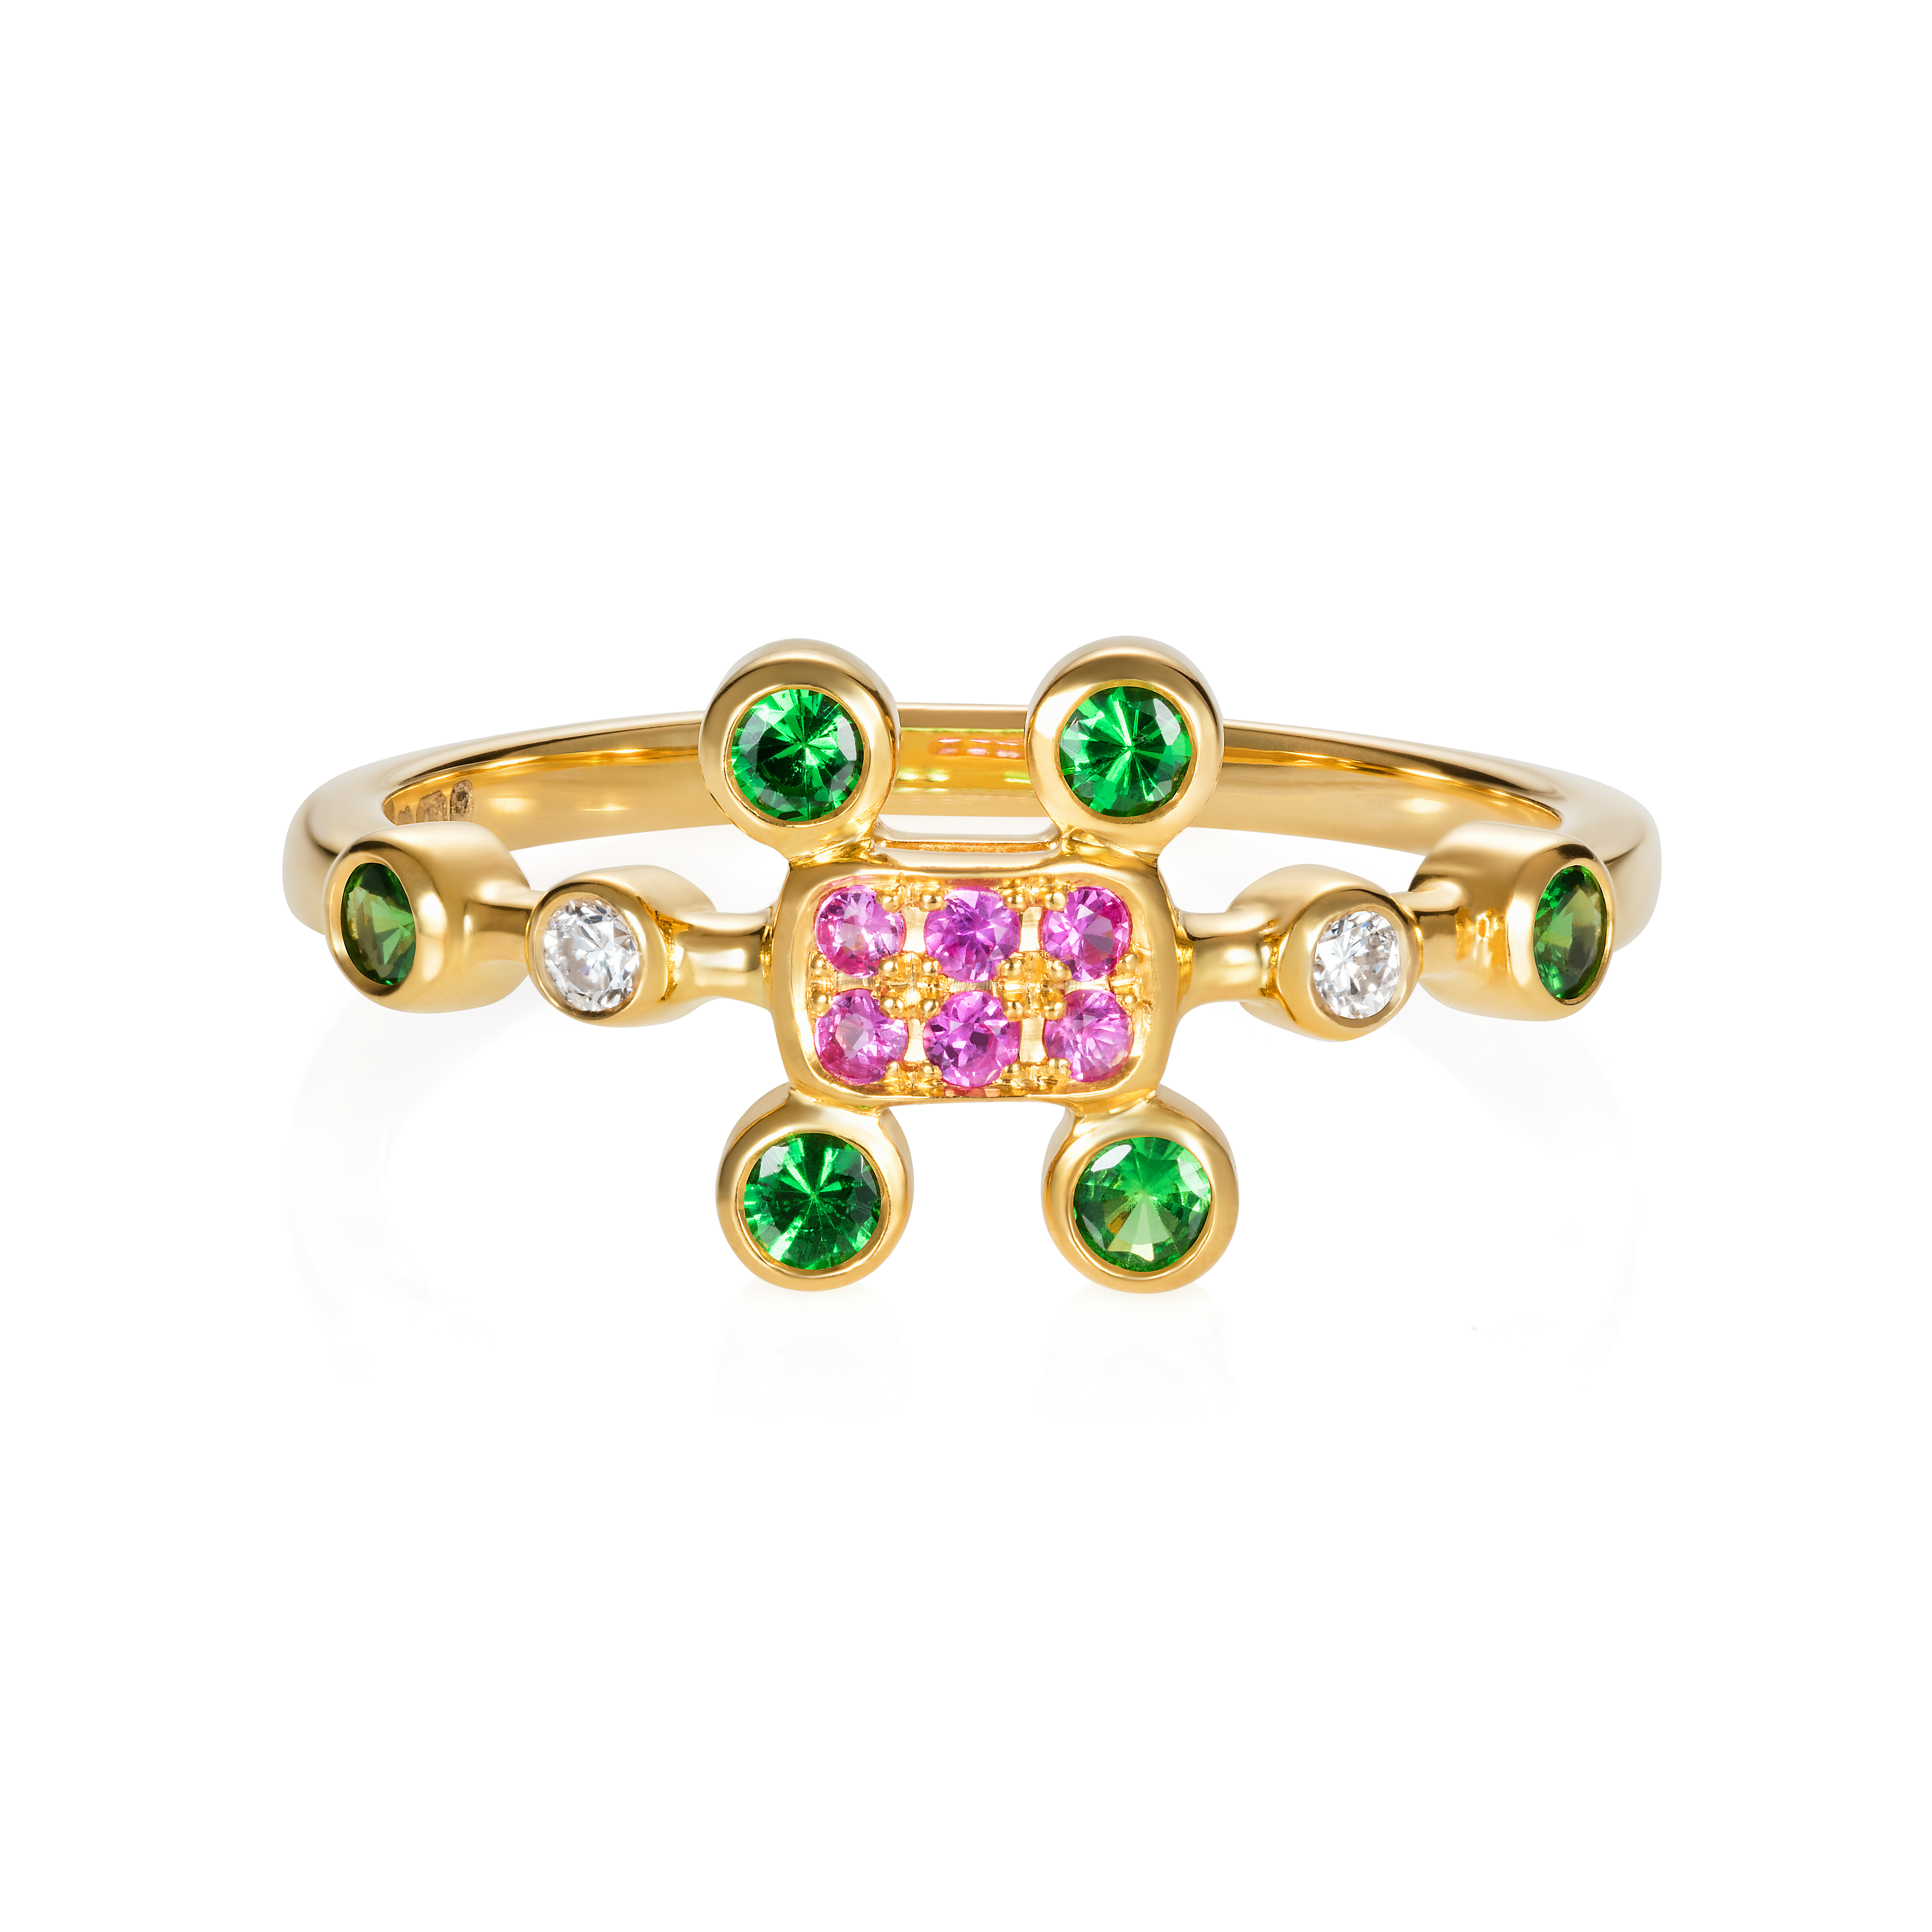 Princess Of The Woods Ring Set With Hot Pink Sapphires, Tsavorite Garnets And Diamonds In 18k Gold